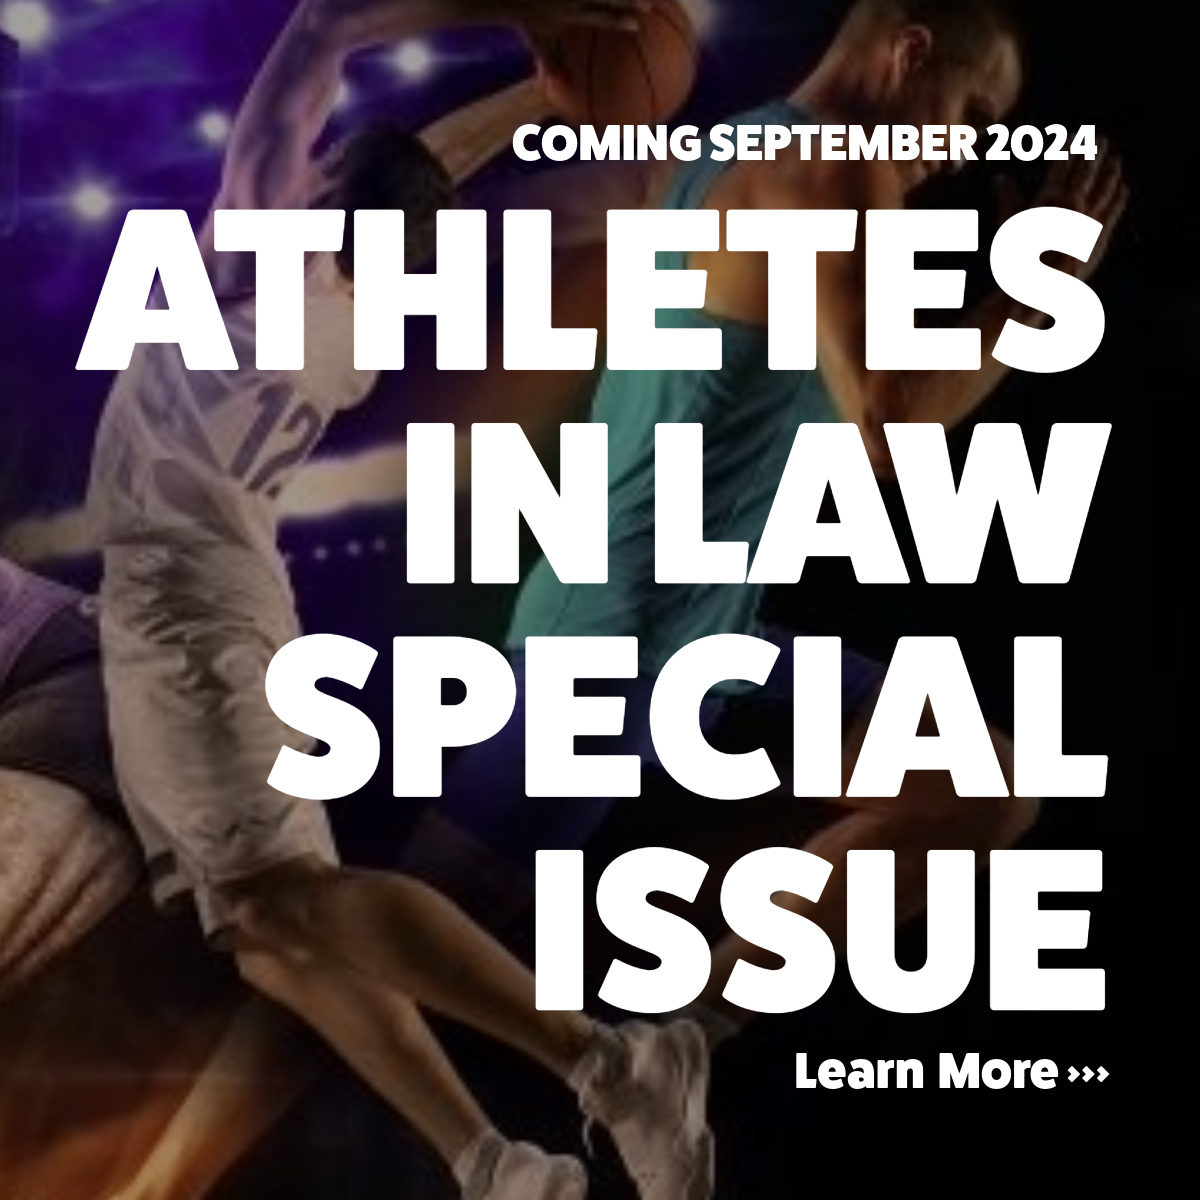 Athletes in Law Special Issue